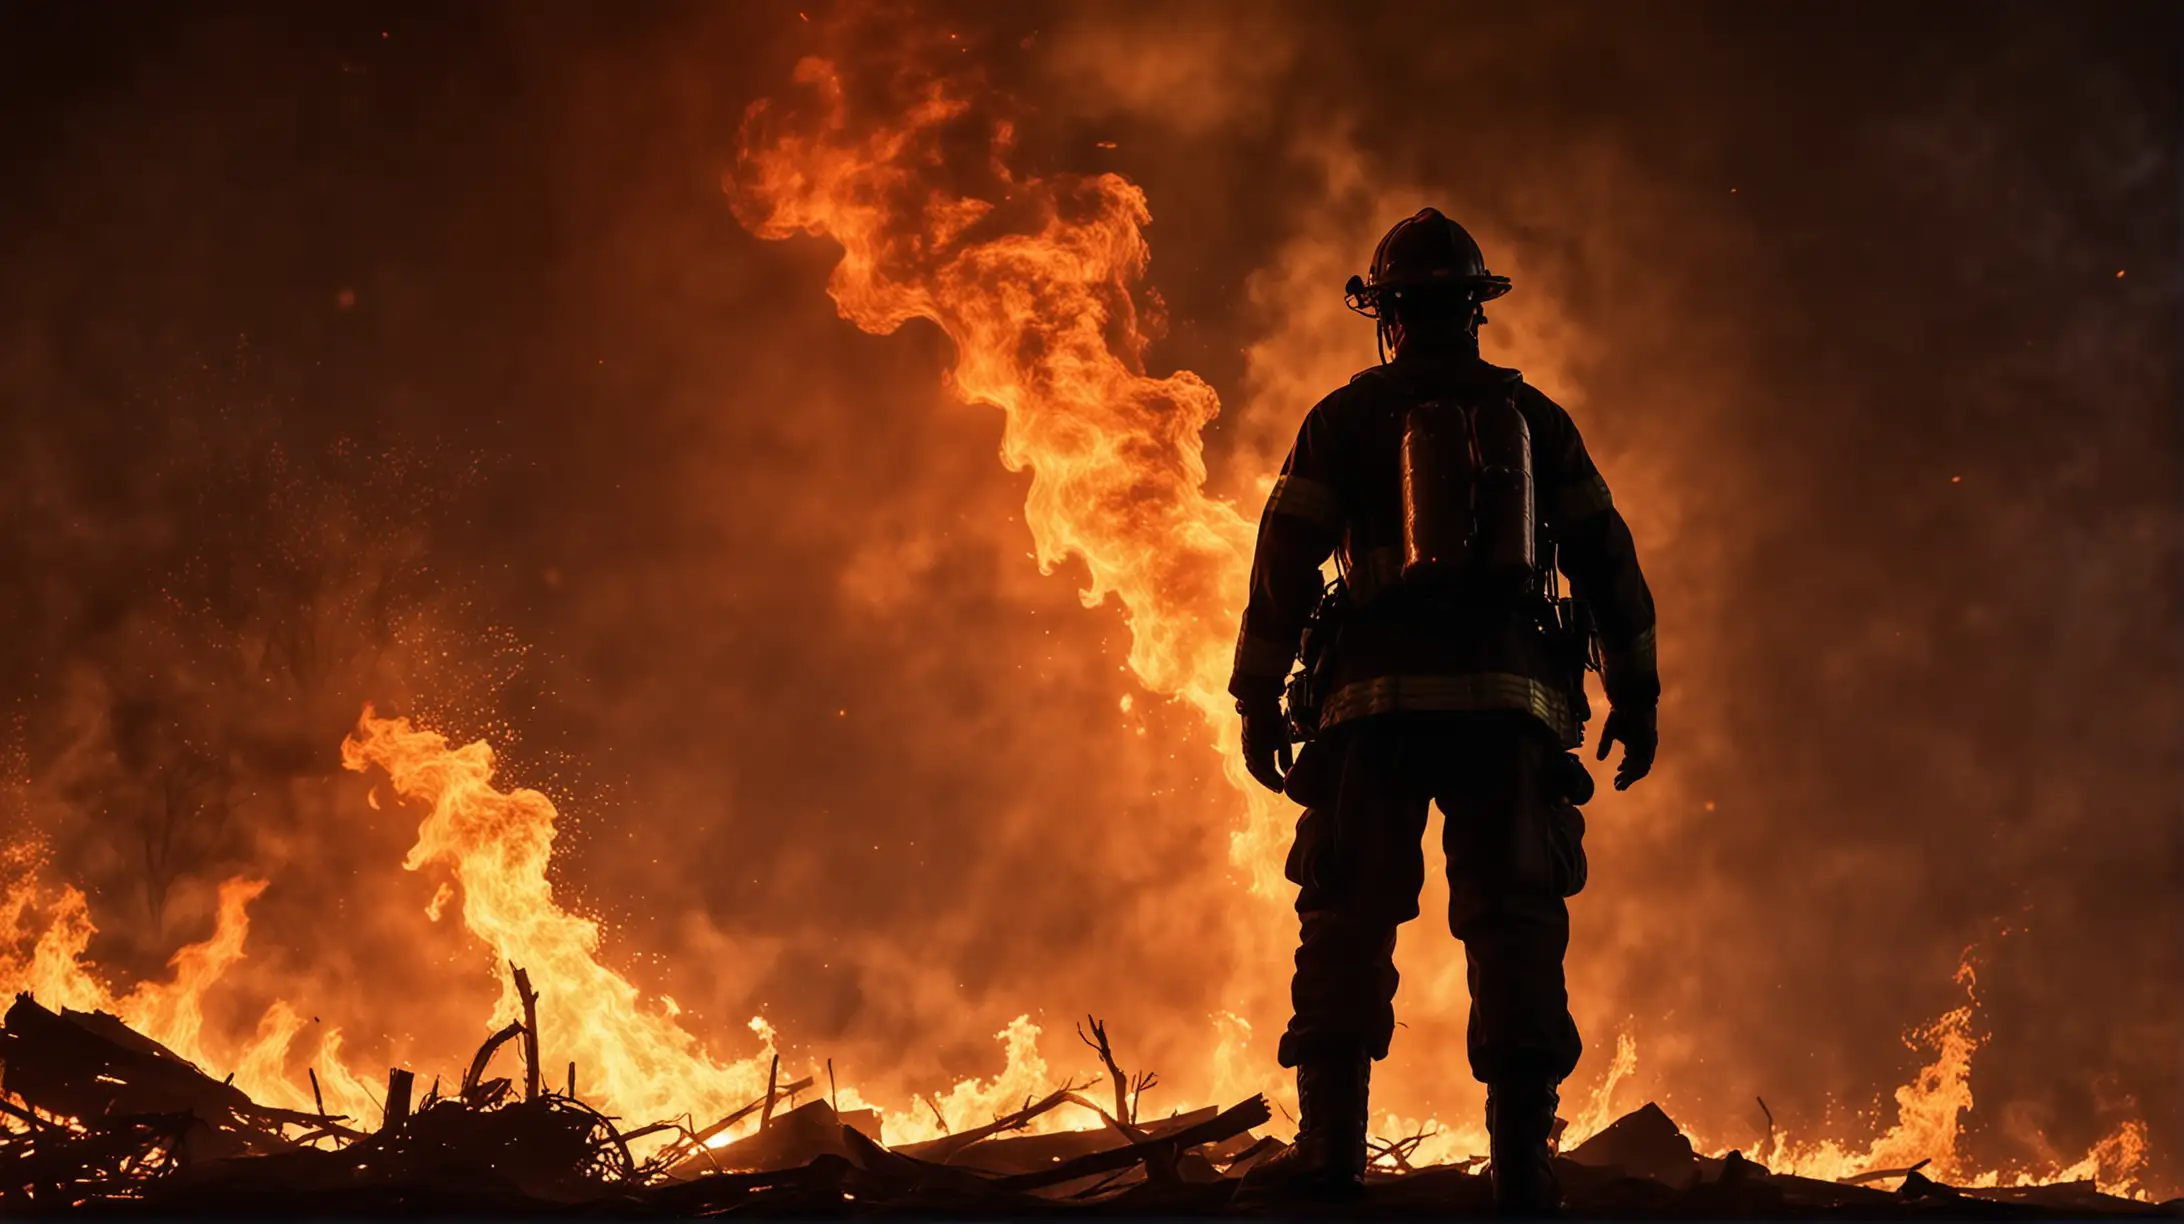 Courageous Fireman Battles Raging Inferno to Save Lives